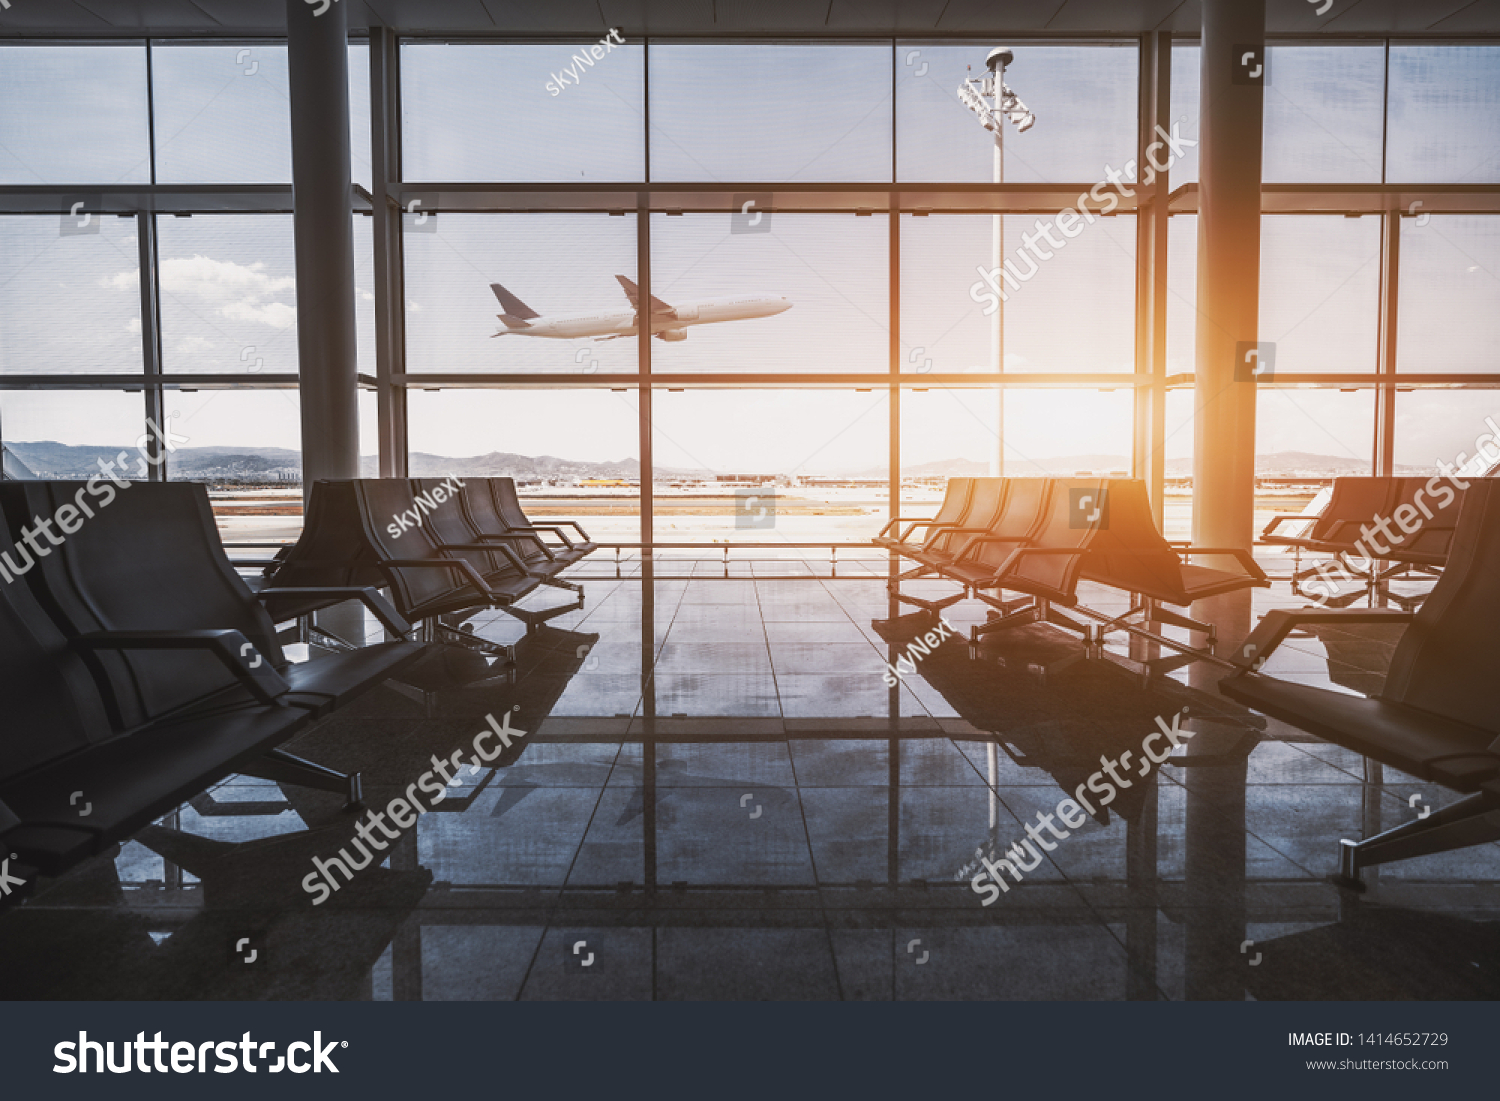 Wide-angle view of a modern aircraft gaining the altitude outside the glass window facade of a contemporary waiting hall with multiple rows of seats and reflections indoors of an airport terminal #1414652729